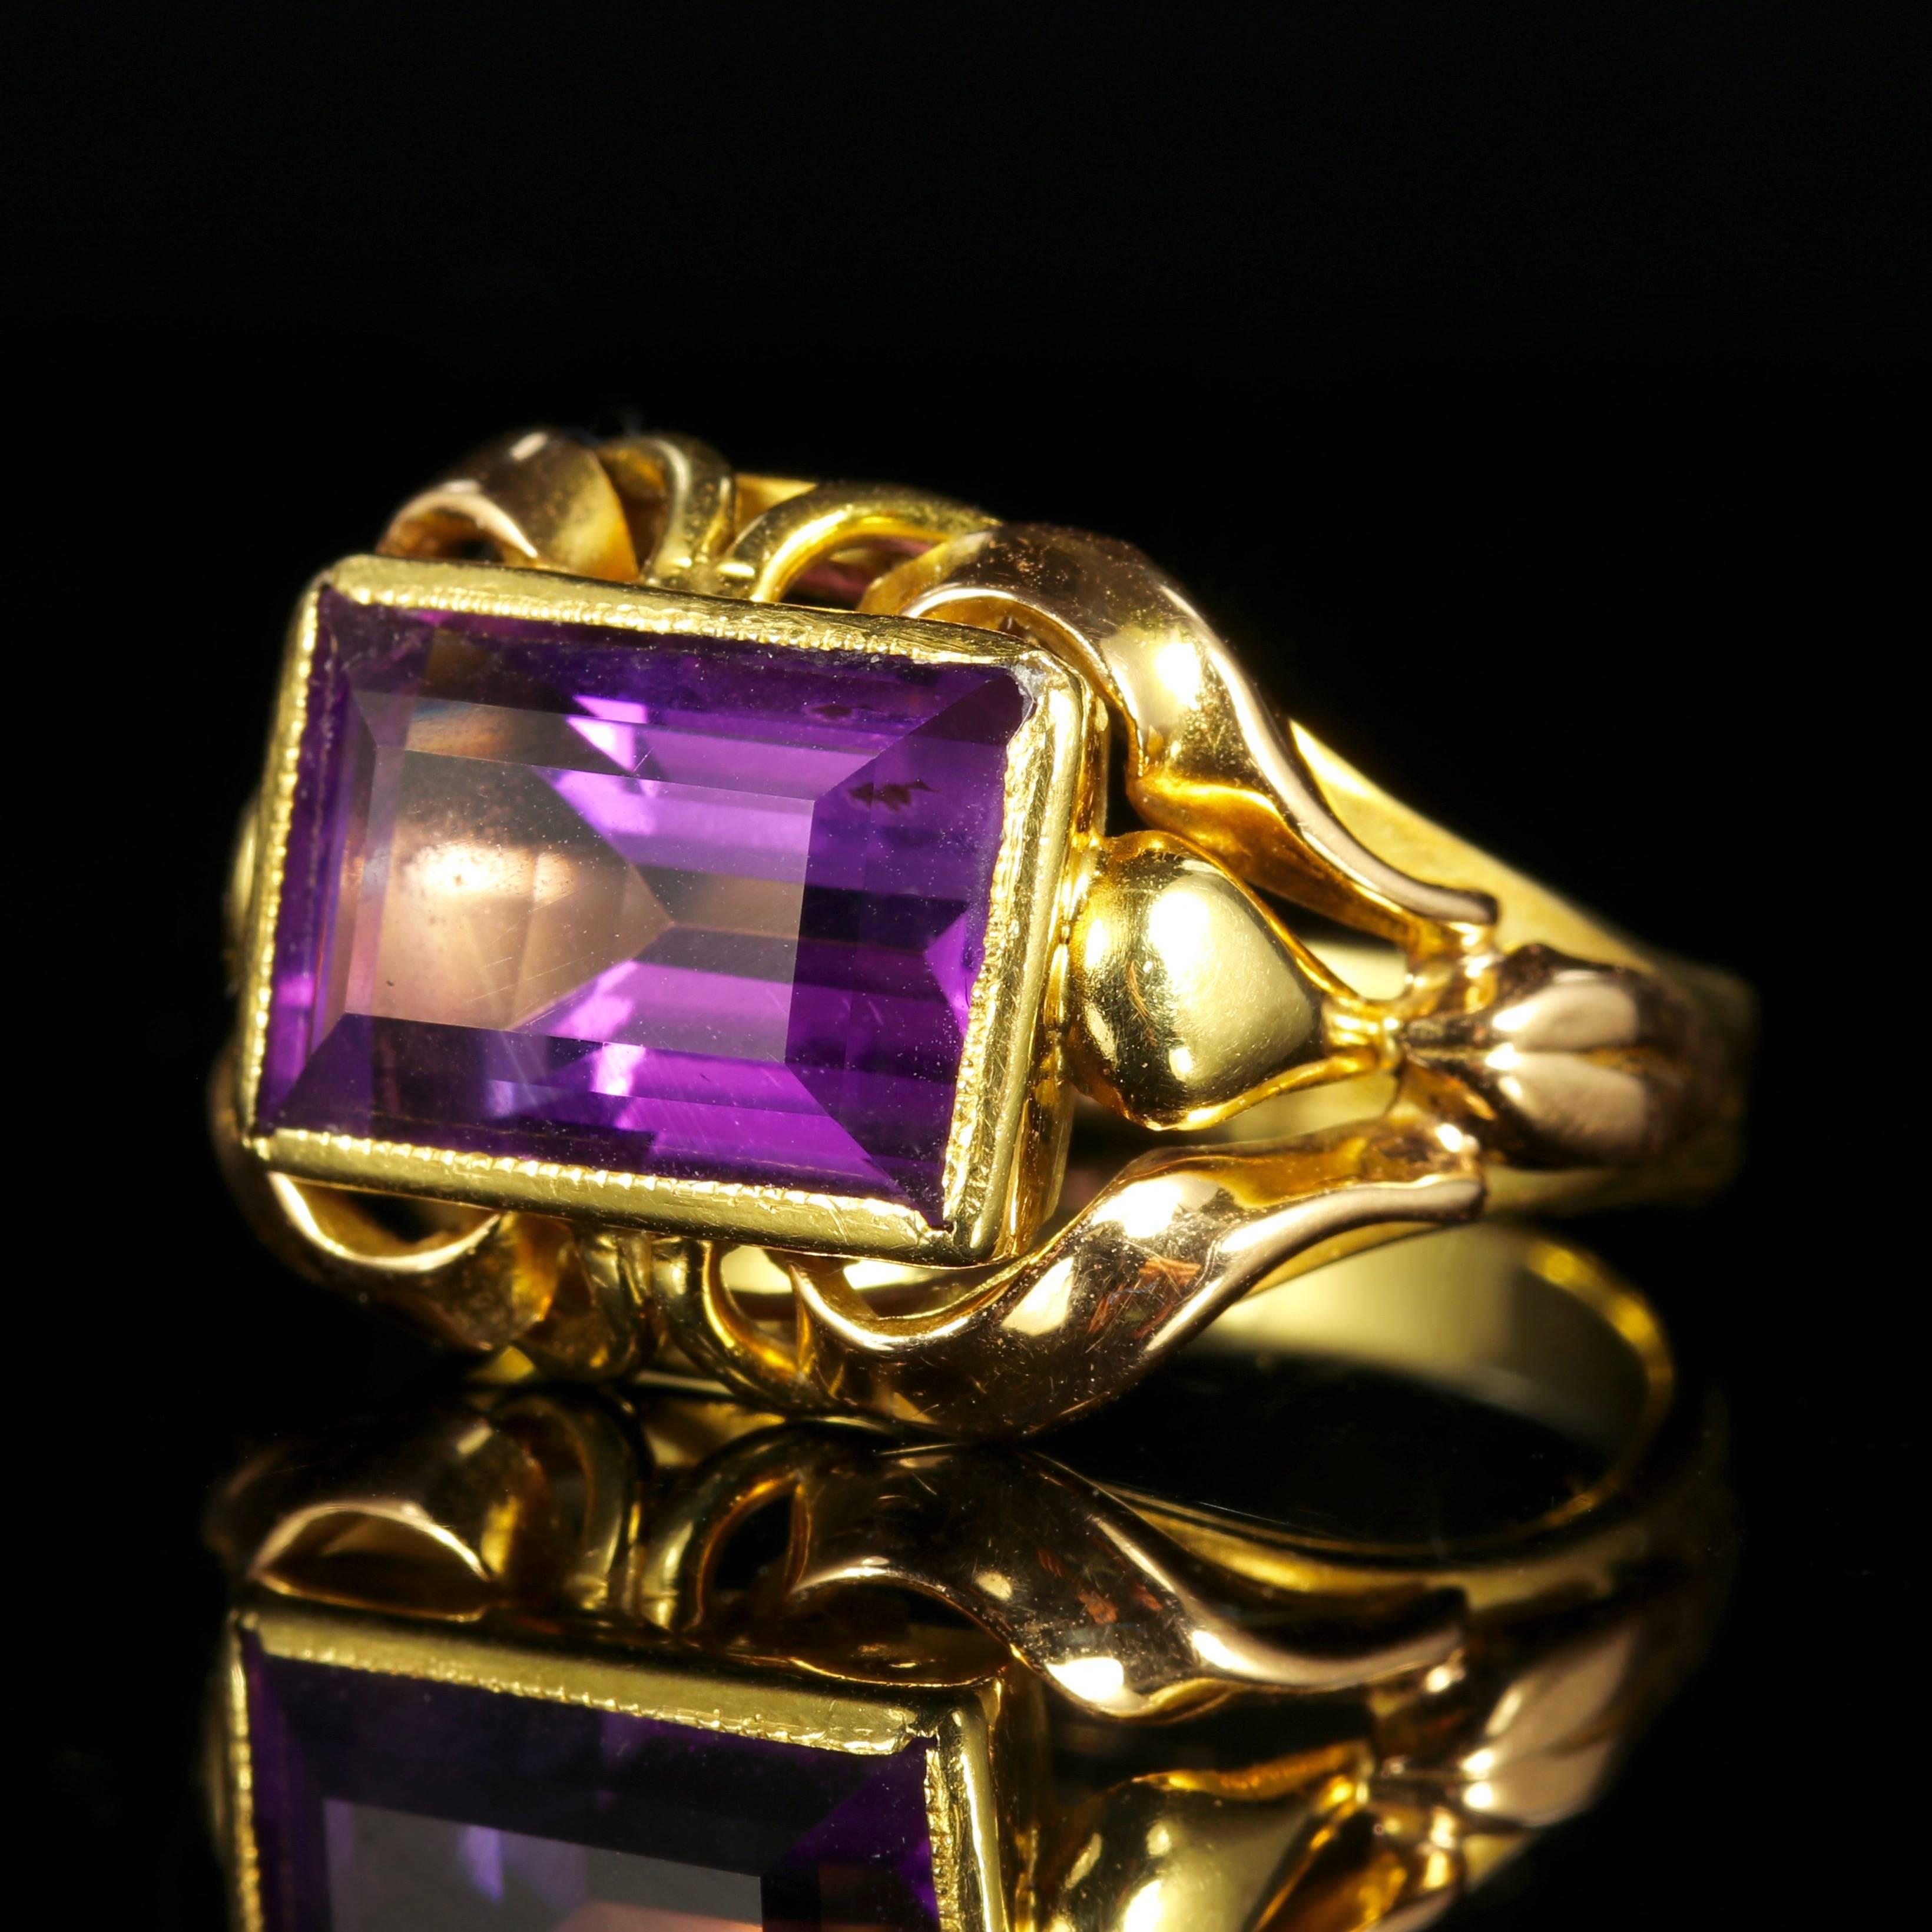 This very beautiful Victorian ring boasts a large deep purple Amethyst in the centre. 

The ring is Circa 1900 and displays beautiful workmanship from the Arts and Crafts movement. 

The Arts and Crafts Movement began in Britain around 1880 and